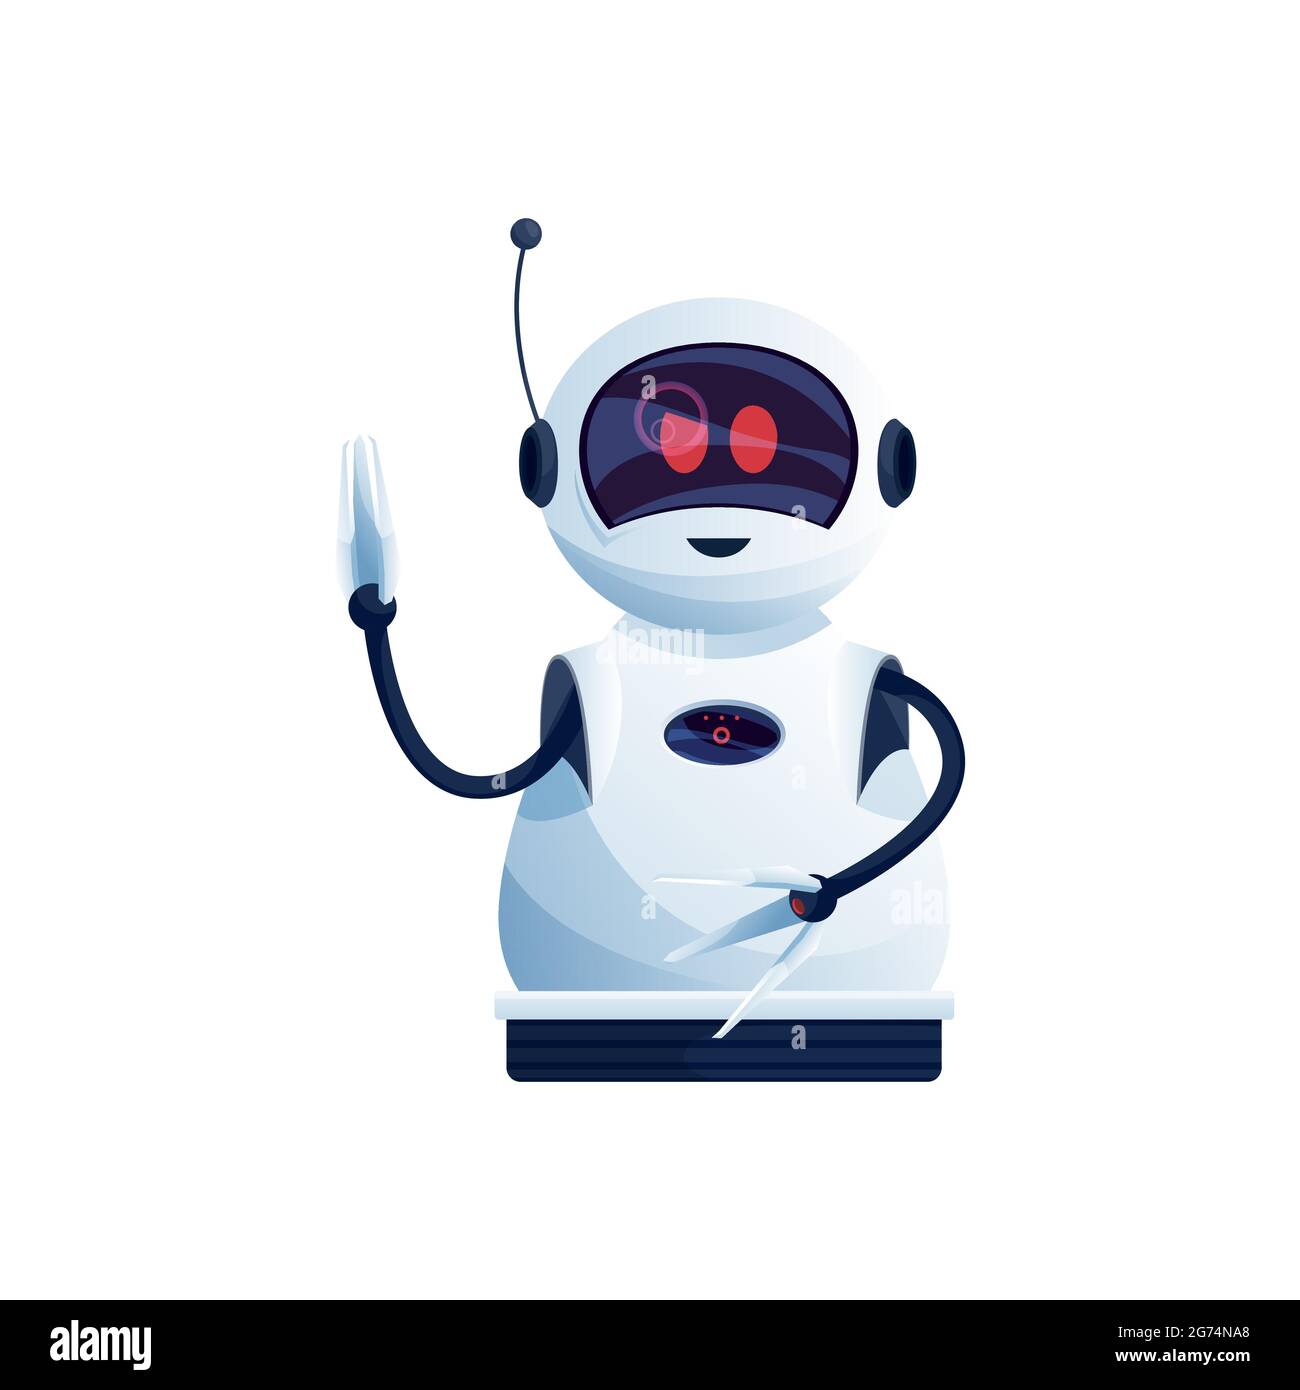 https://c8.alamy.com/comp/2G74NA8/digital-robot-with-hands-loaders-antenna-on-head-isolated-plastic-hi-tech-character-vector-android-robot-mechanical-sci-fi-futuristic-kids-toy-huma-2G74NA8.jpg